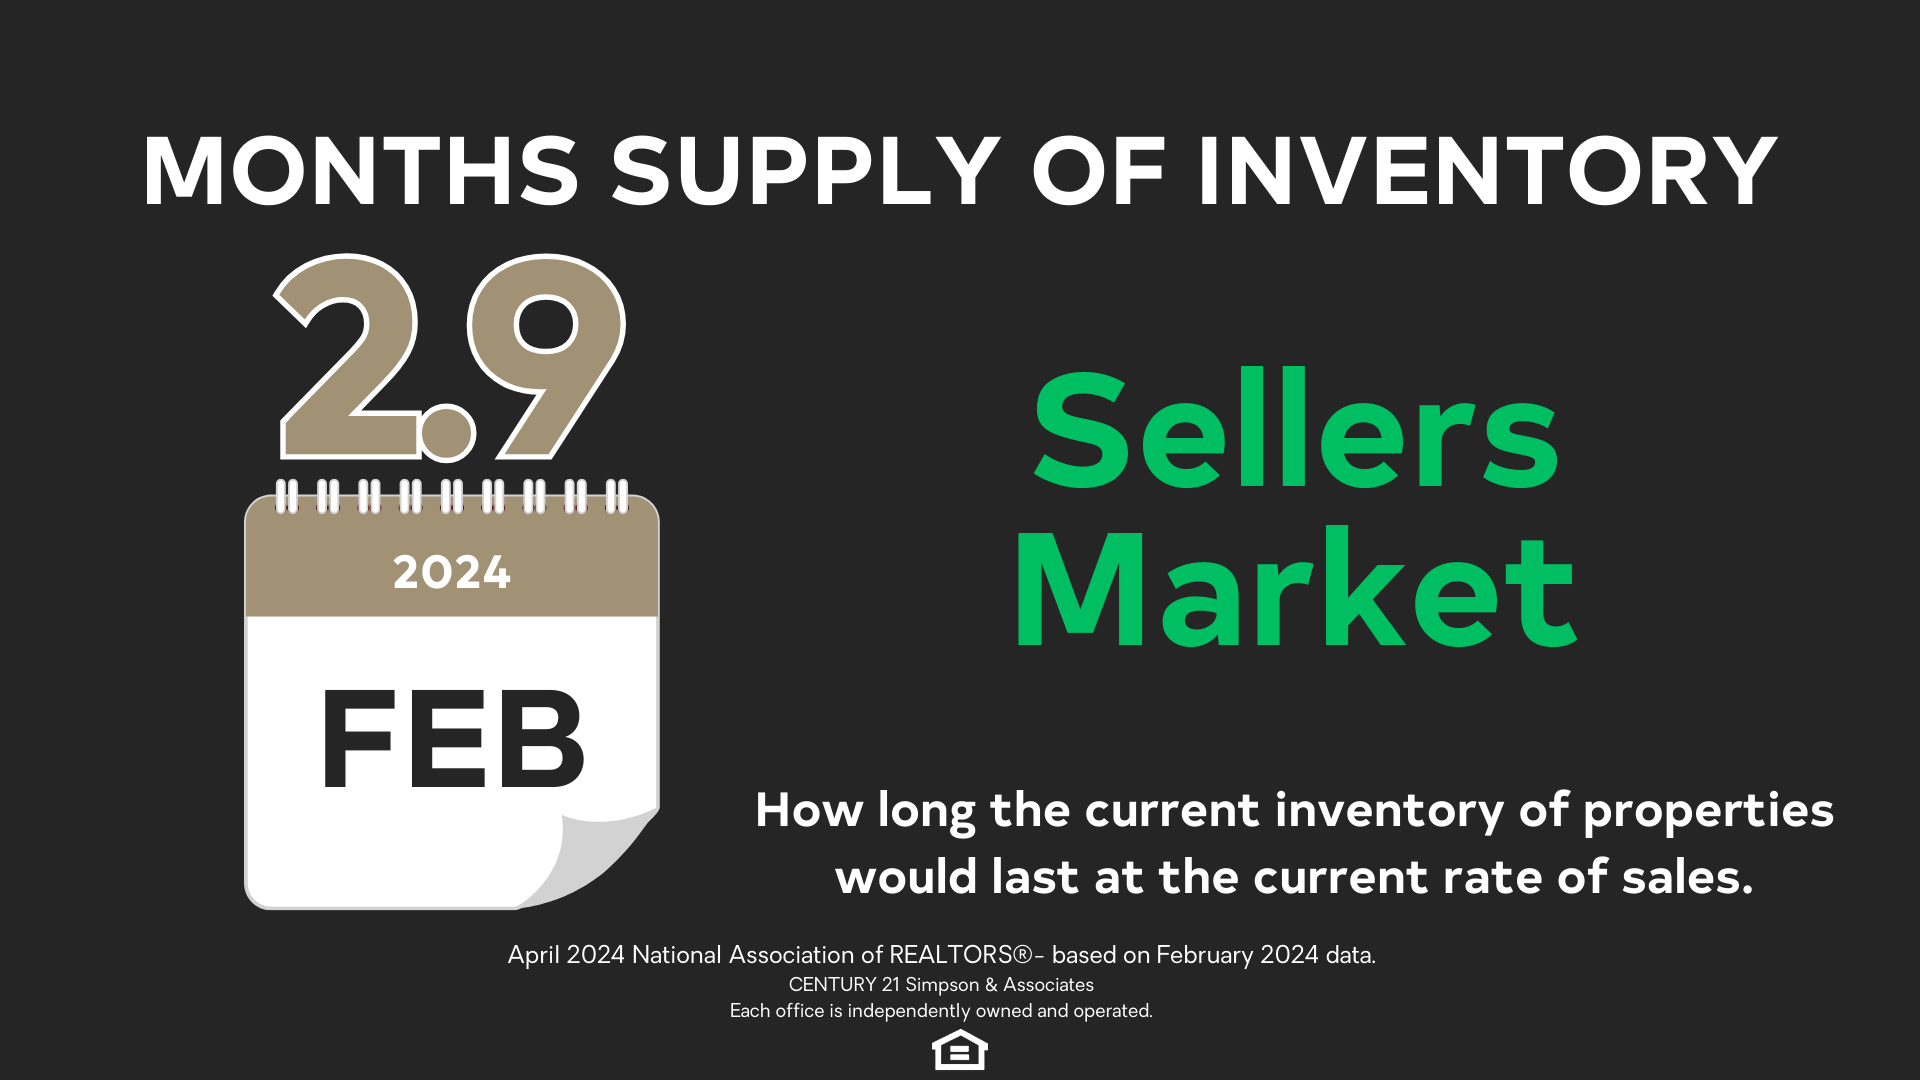 Apr '24 Months Supply of Inventory